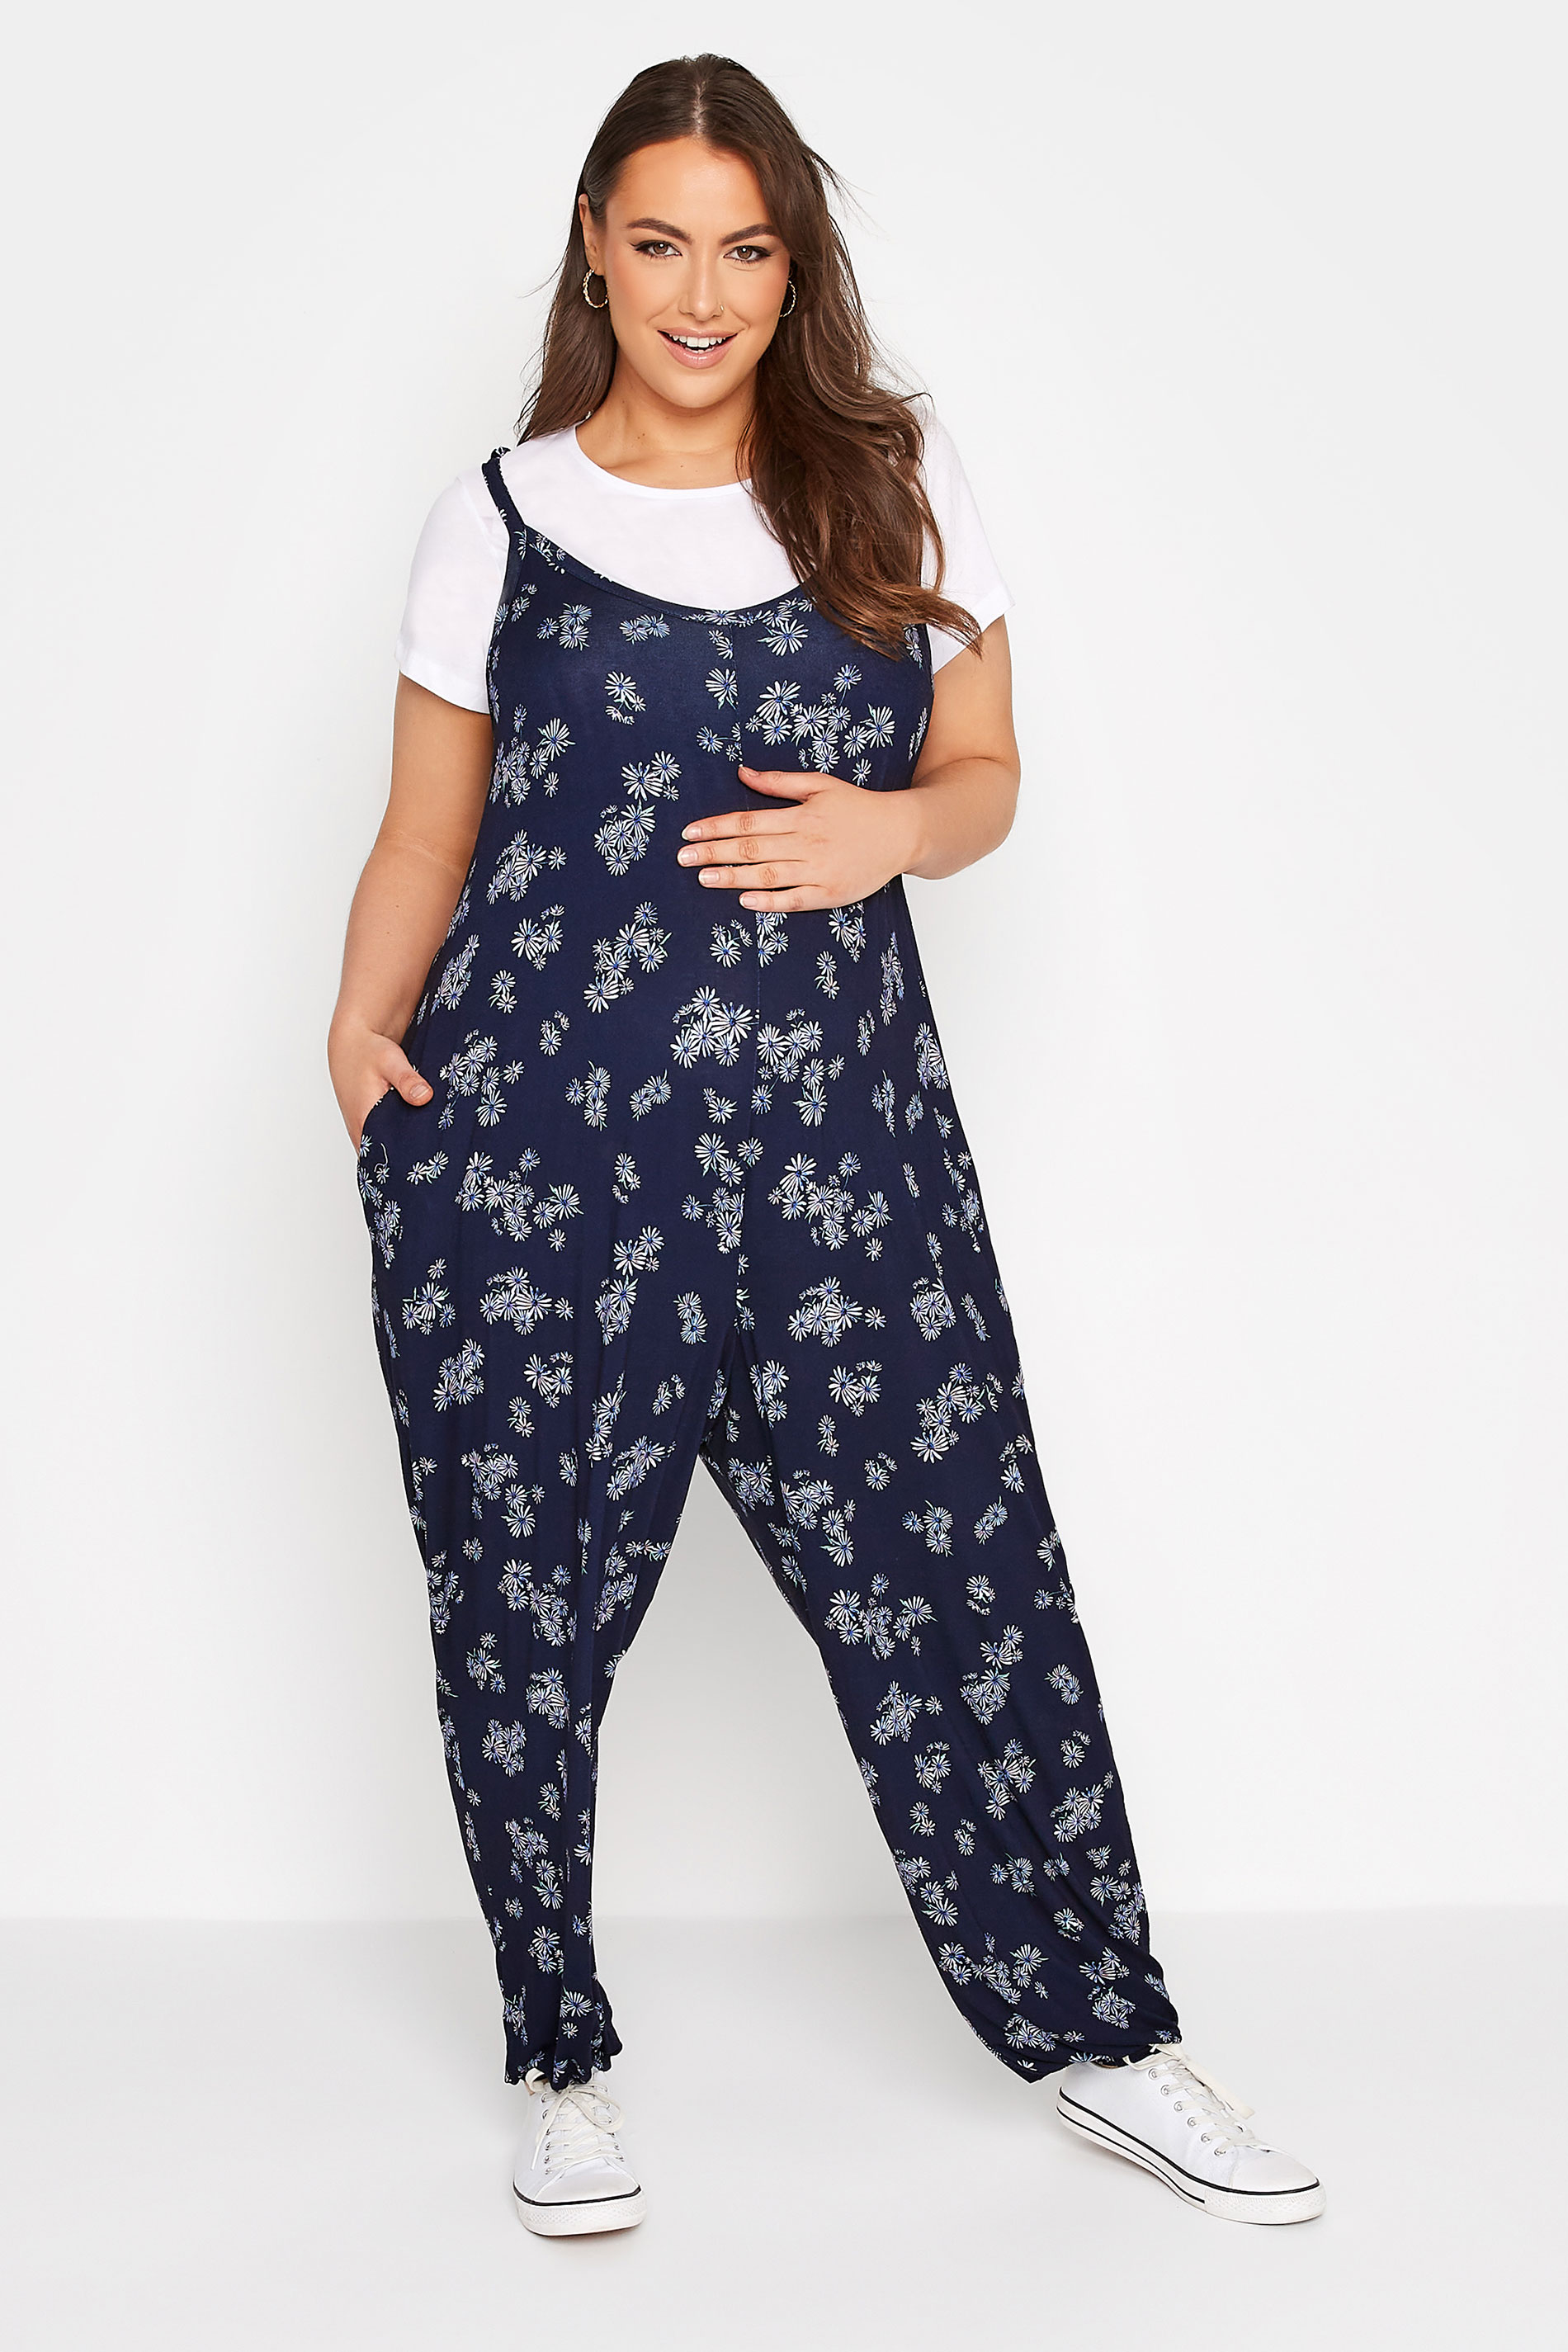 BUMP IT UP MATERNITY Plus Size Navy Blue Daisy Print Jumpsuit | Yours Clothing  1